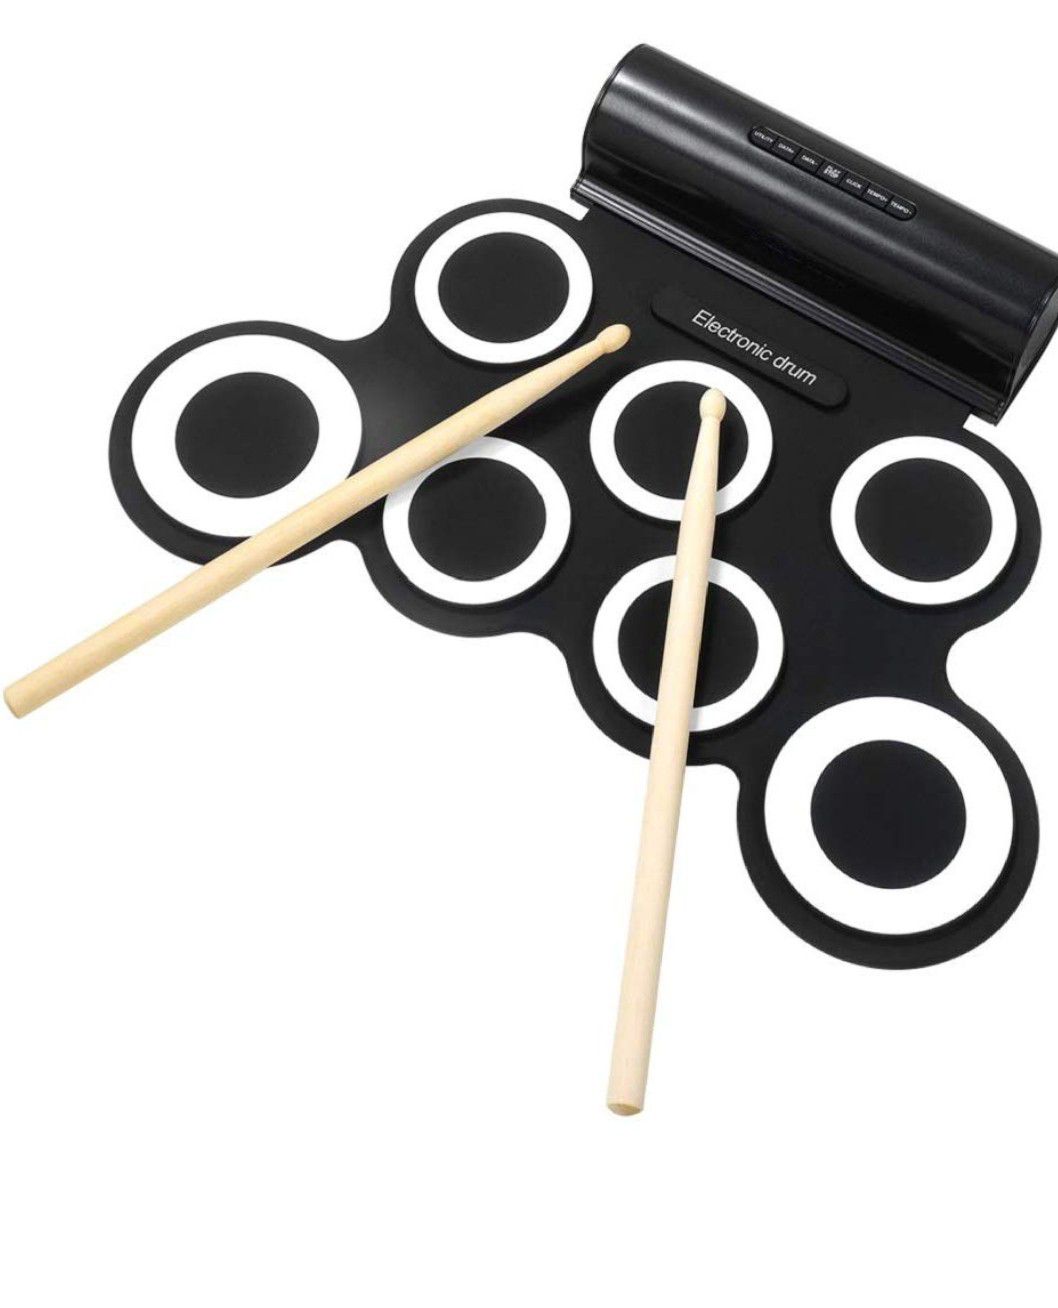 Electronic Drum Set Roll Up Drum Pads IWORD Midi Drum Kit With Headphone Jack Portable Practice Drum Kit Drum Pedals Drum Sticks 10 Hours Playtime